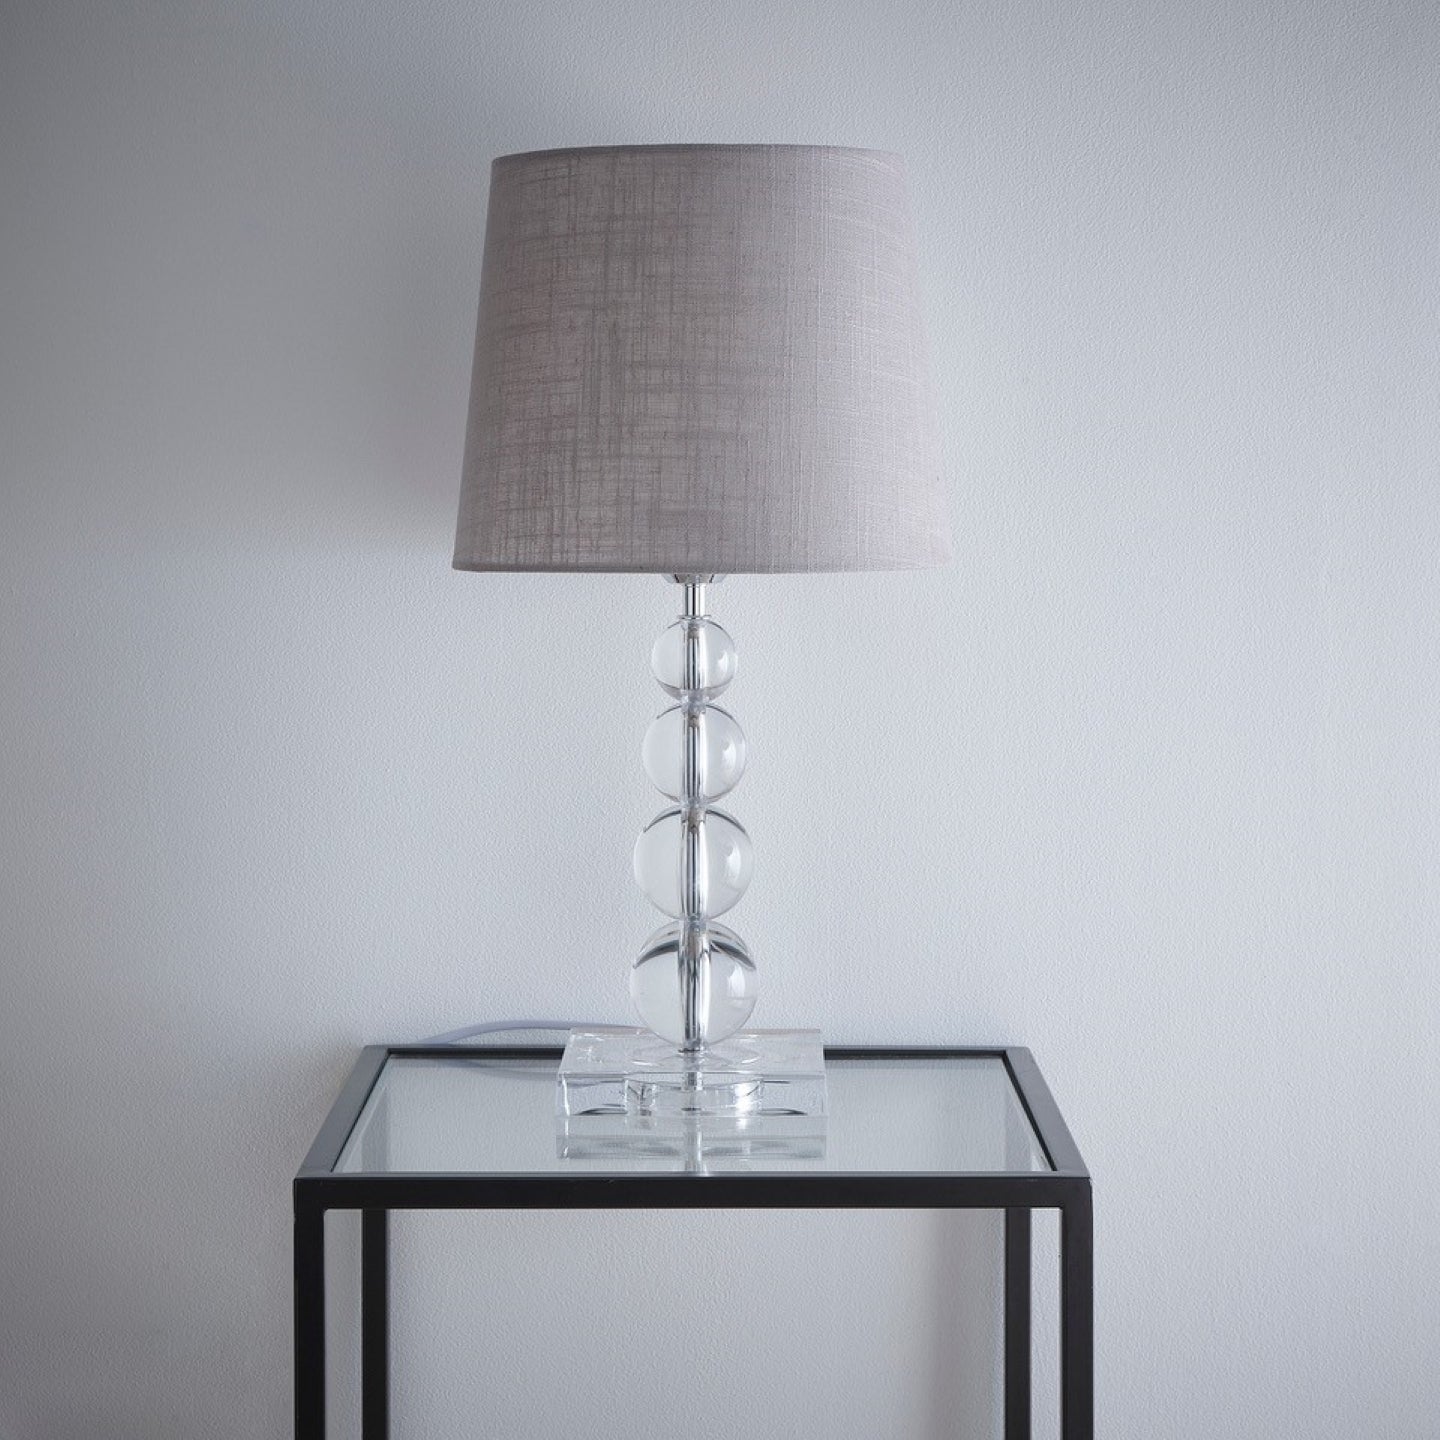 Table lamp with stunning acrylic ball structure with a linen black or grey Shade